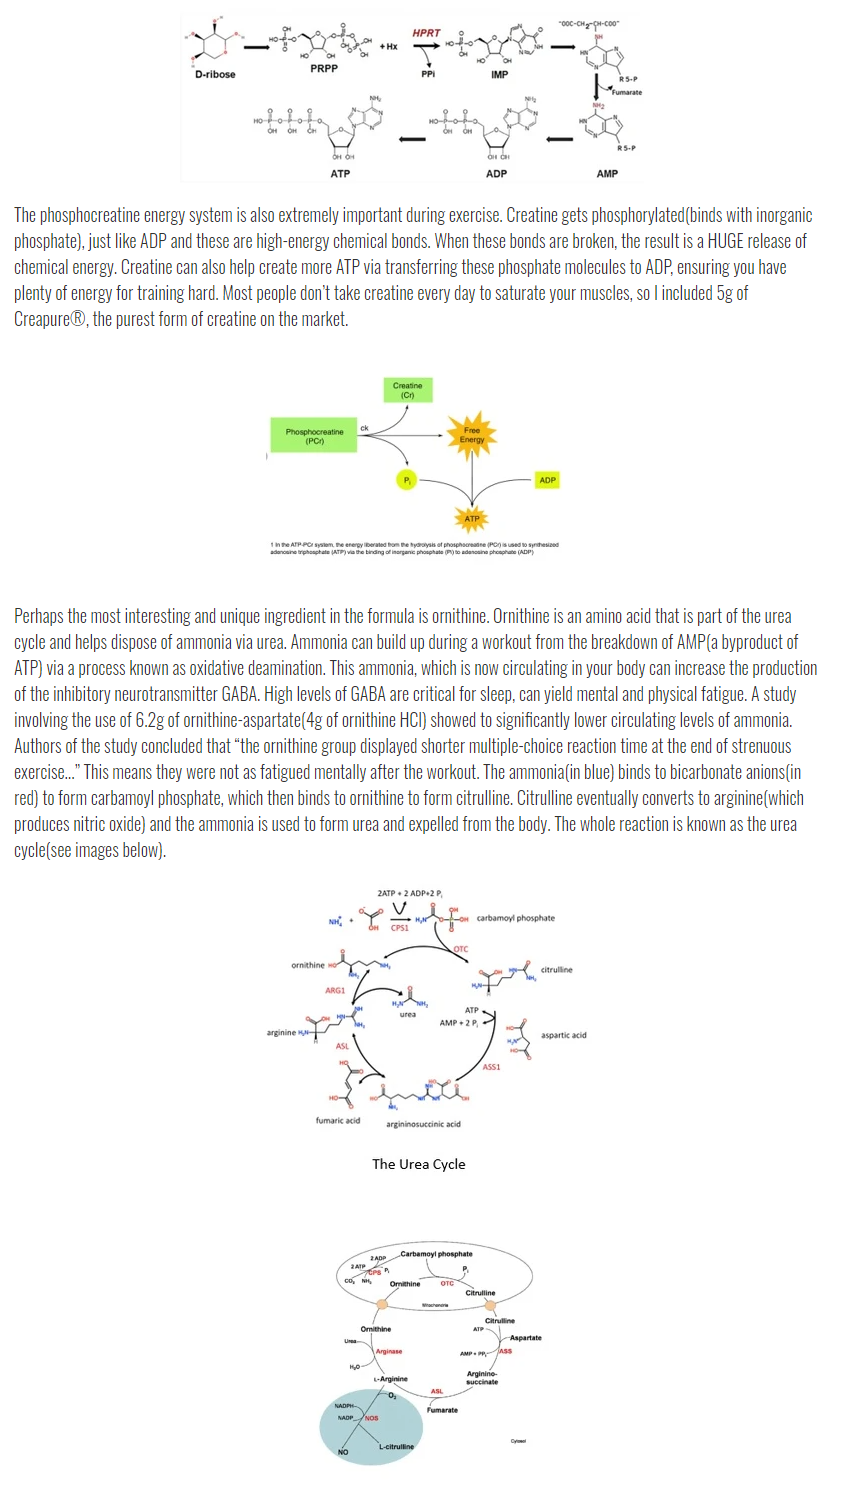 Informative graphic of the phosphocreatine energy system and urea cycle during exercise. Includes ATP, PC, ADP synthesis and roles of ornithine and creatine.